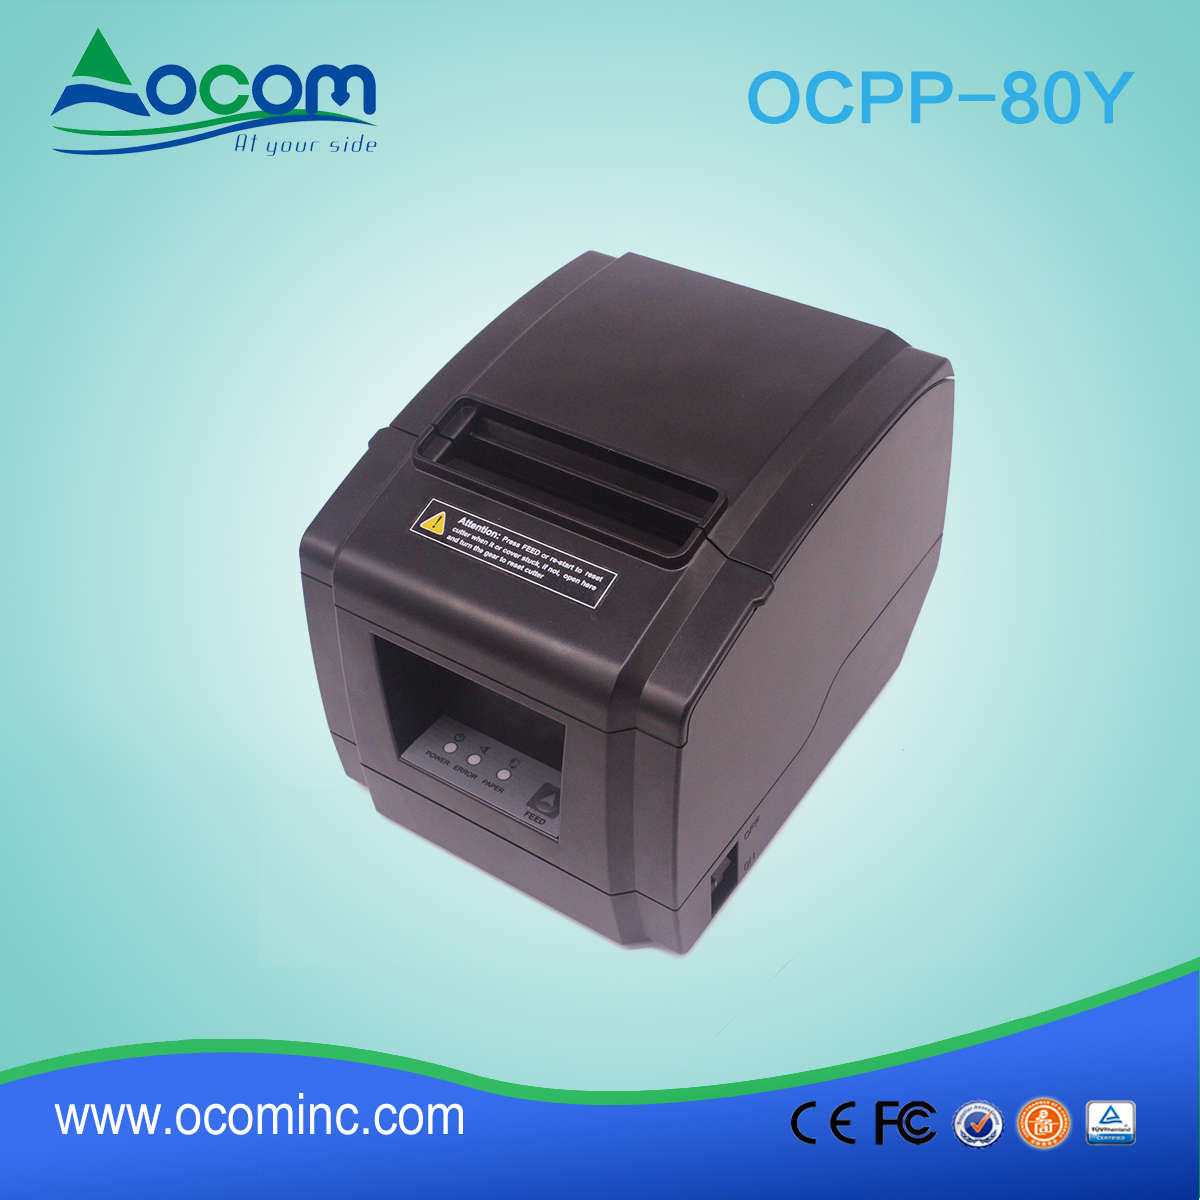 New Model ocpp-80y 80mm thermal Receipt Printer with Auto Cutter